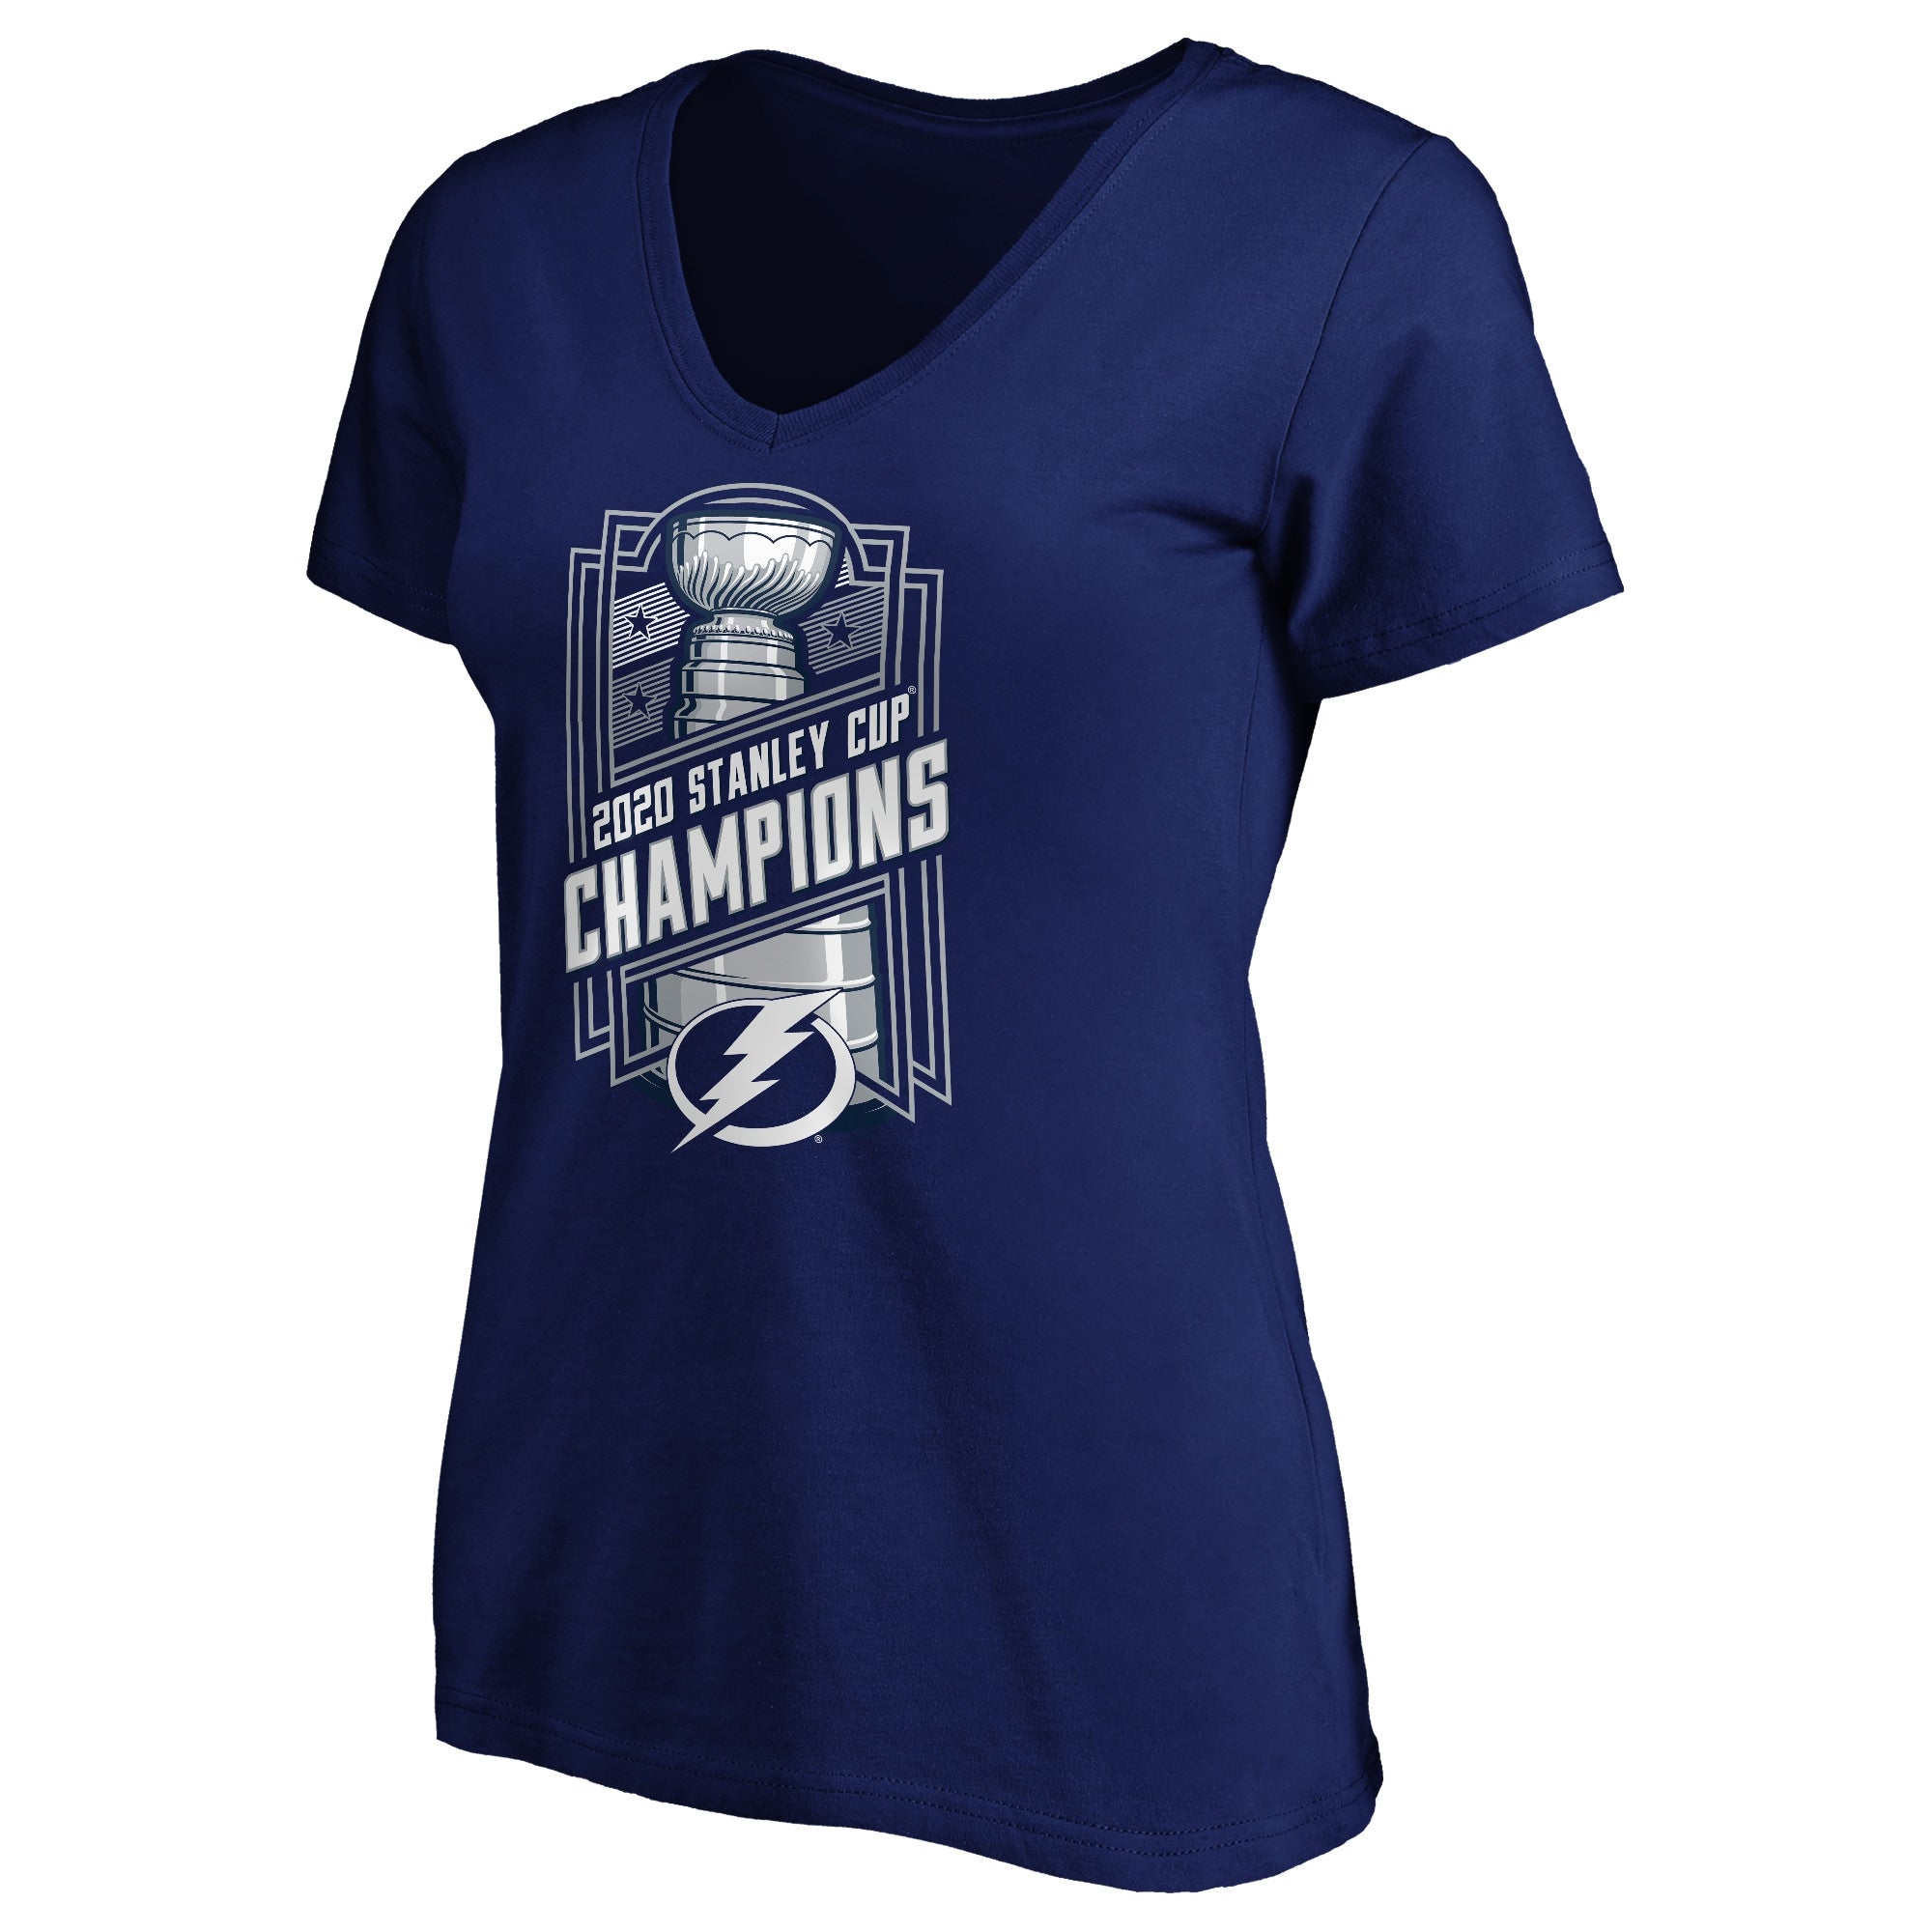 Fanatics Womens Tampa Bay Lightning 2020 Stanley Cup Champions Give and Go Roster V Neck T-Shirt